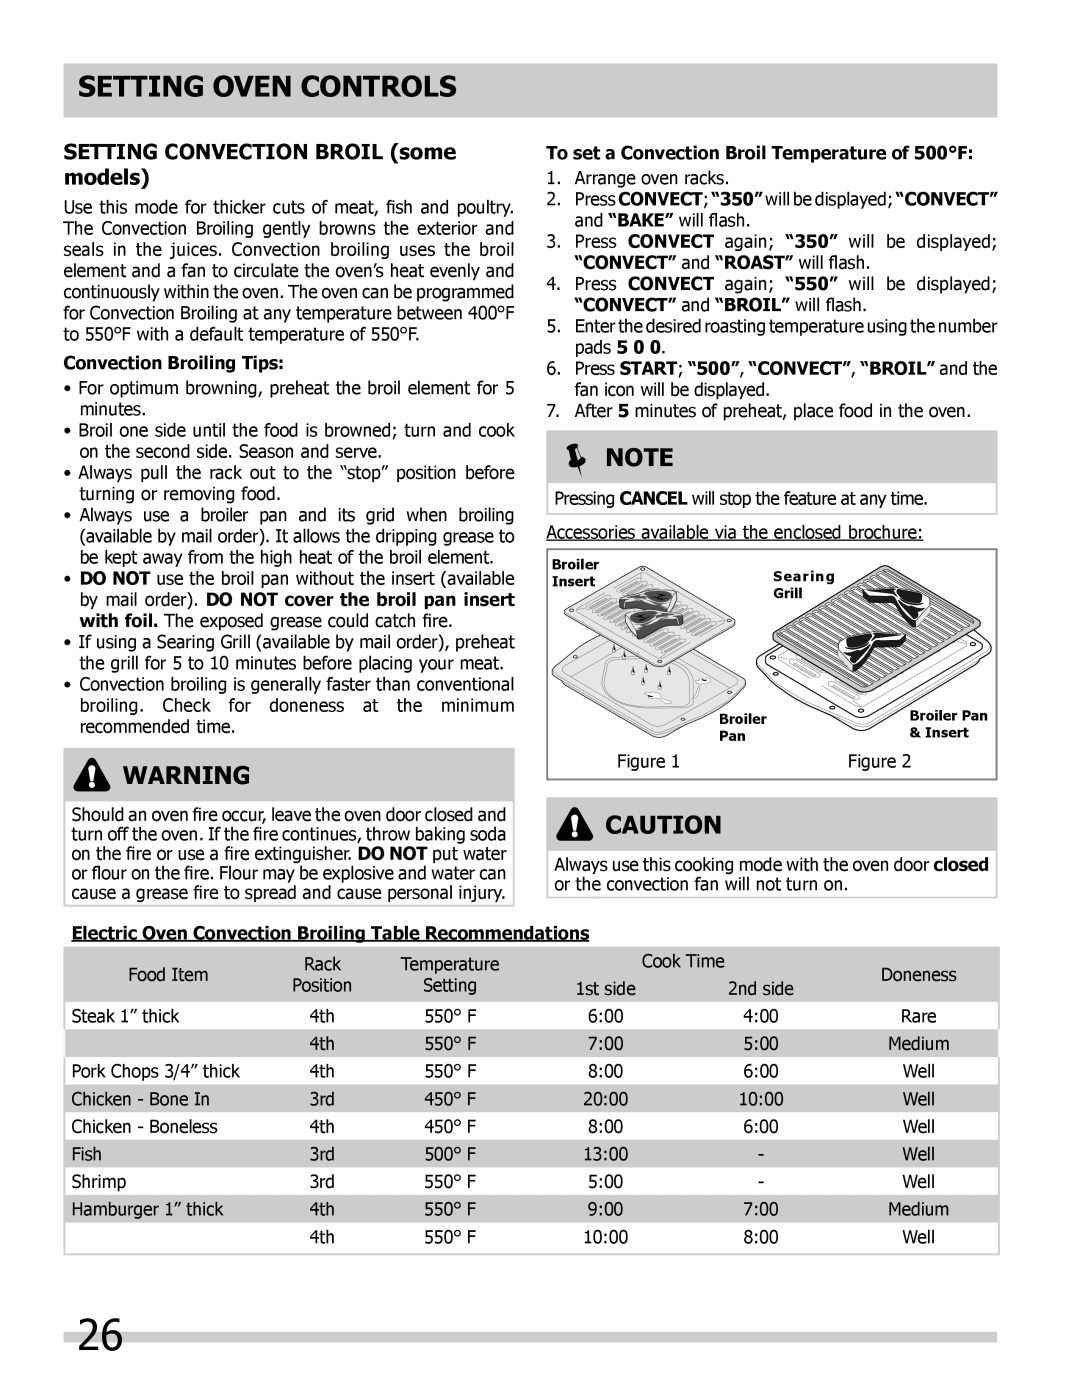 Frigidaire 318205804 manual Setting Convection BROIL some models, Convection Broiling Tips, Setting OVEN controls,  Note 